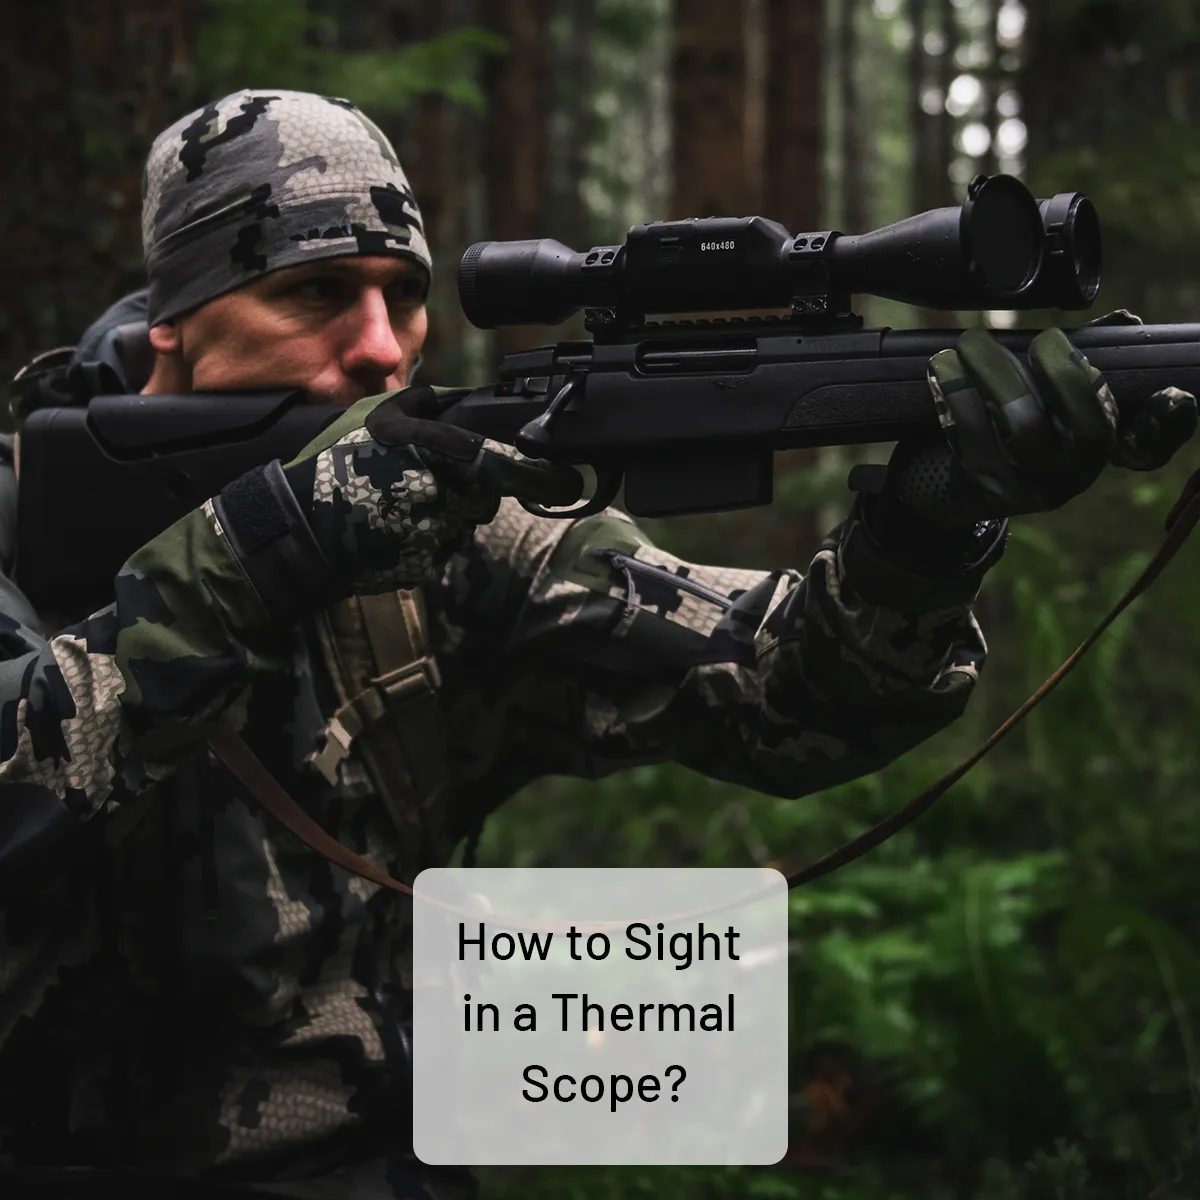 How to sight in a thermal scope